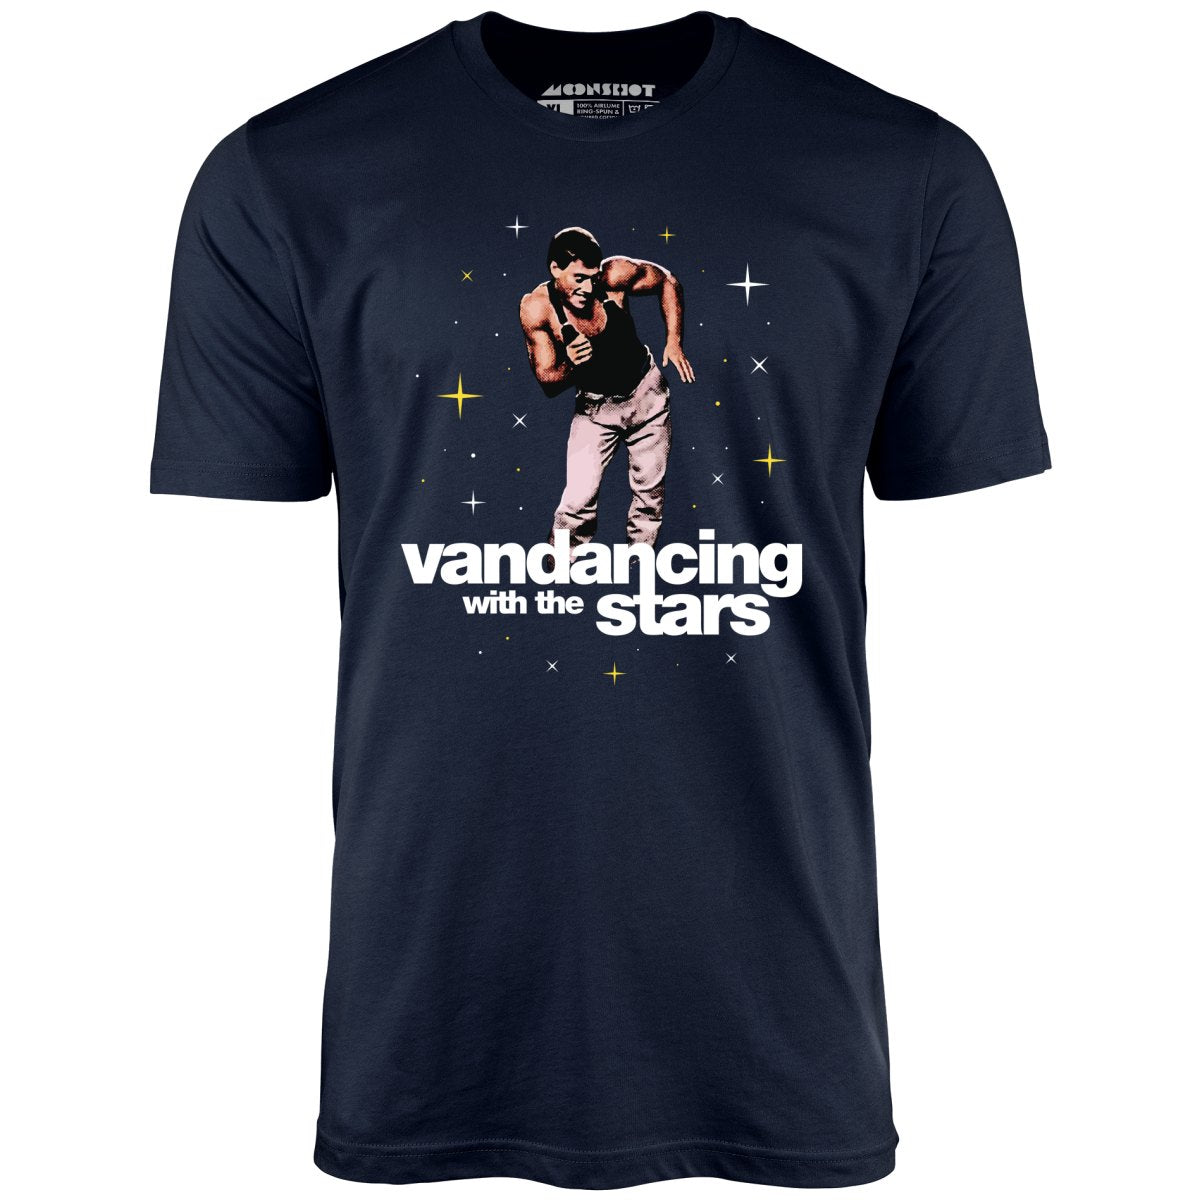 Vandancing With The Stars - Unisex T-Shirt